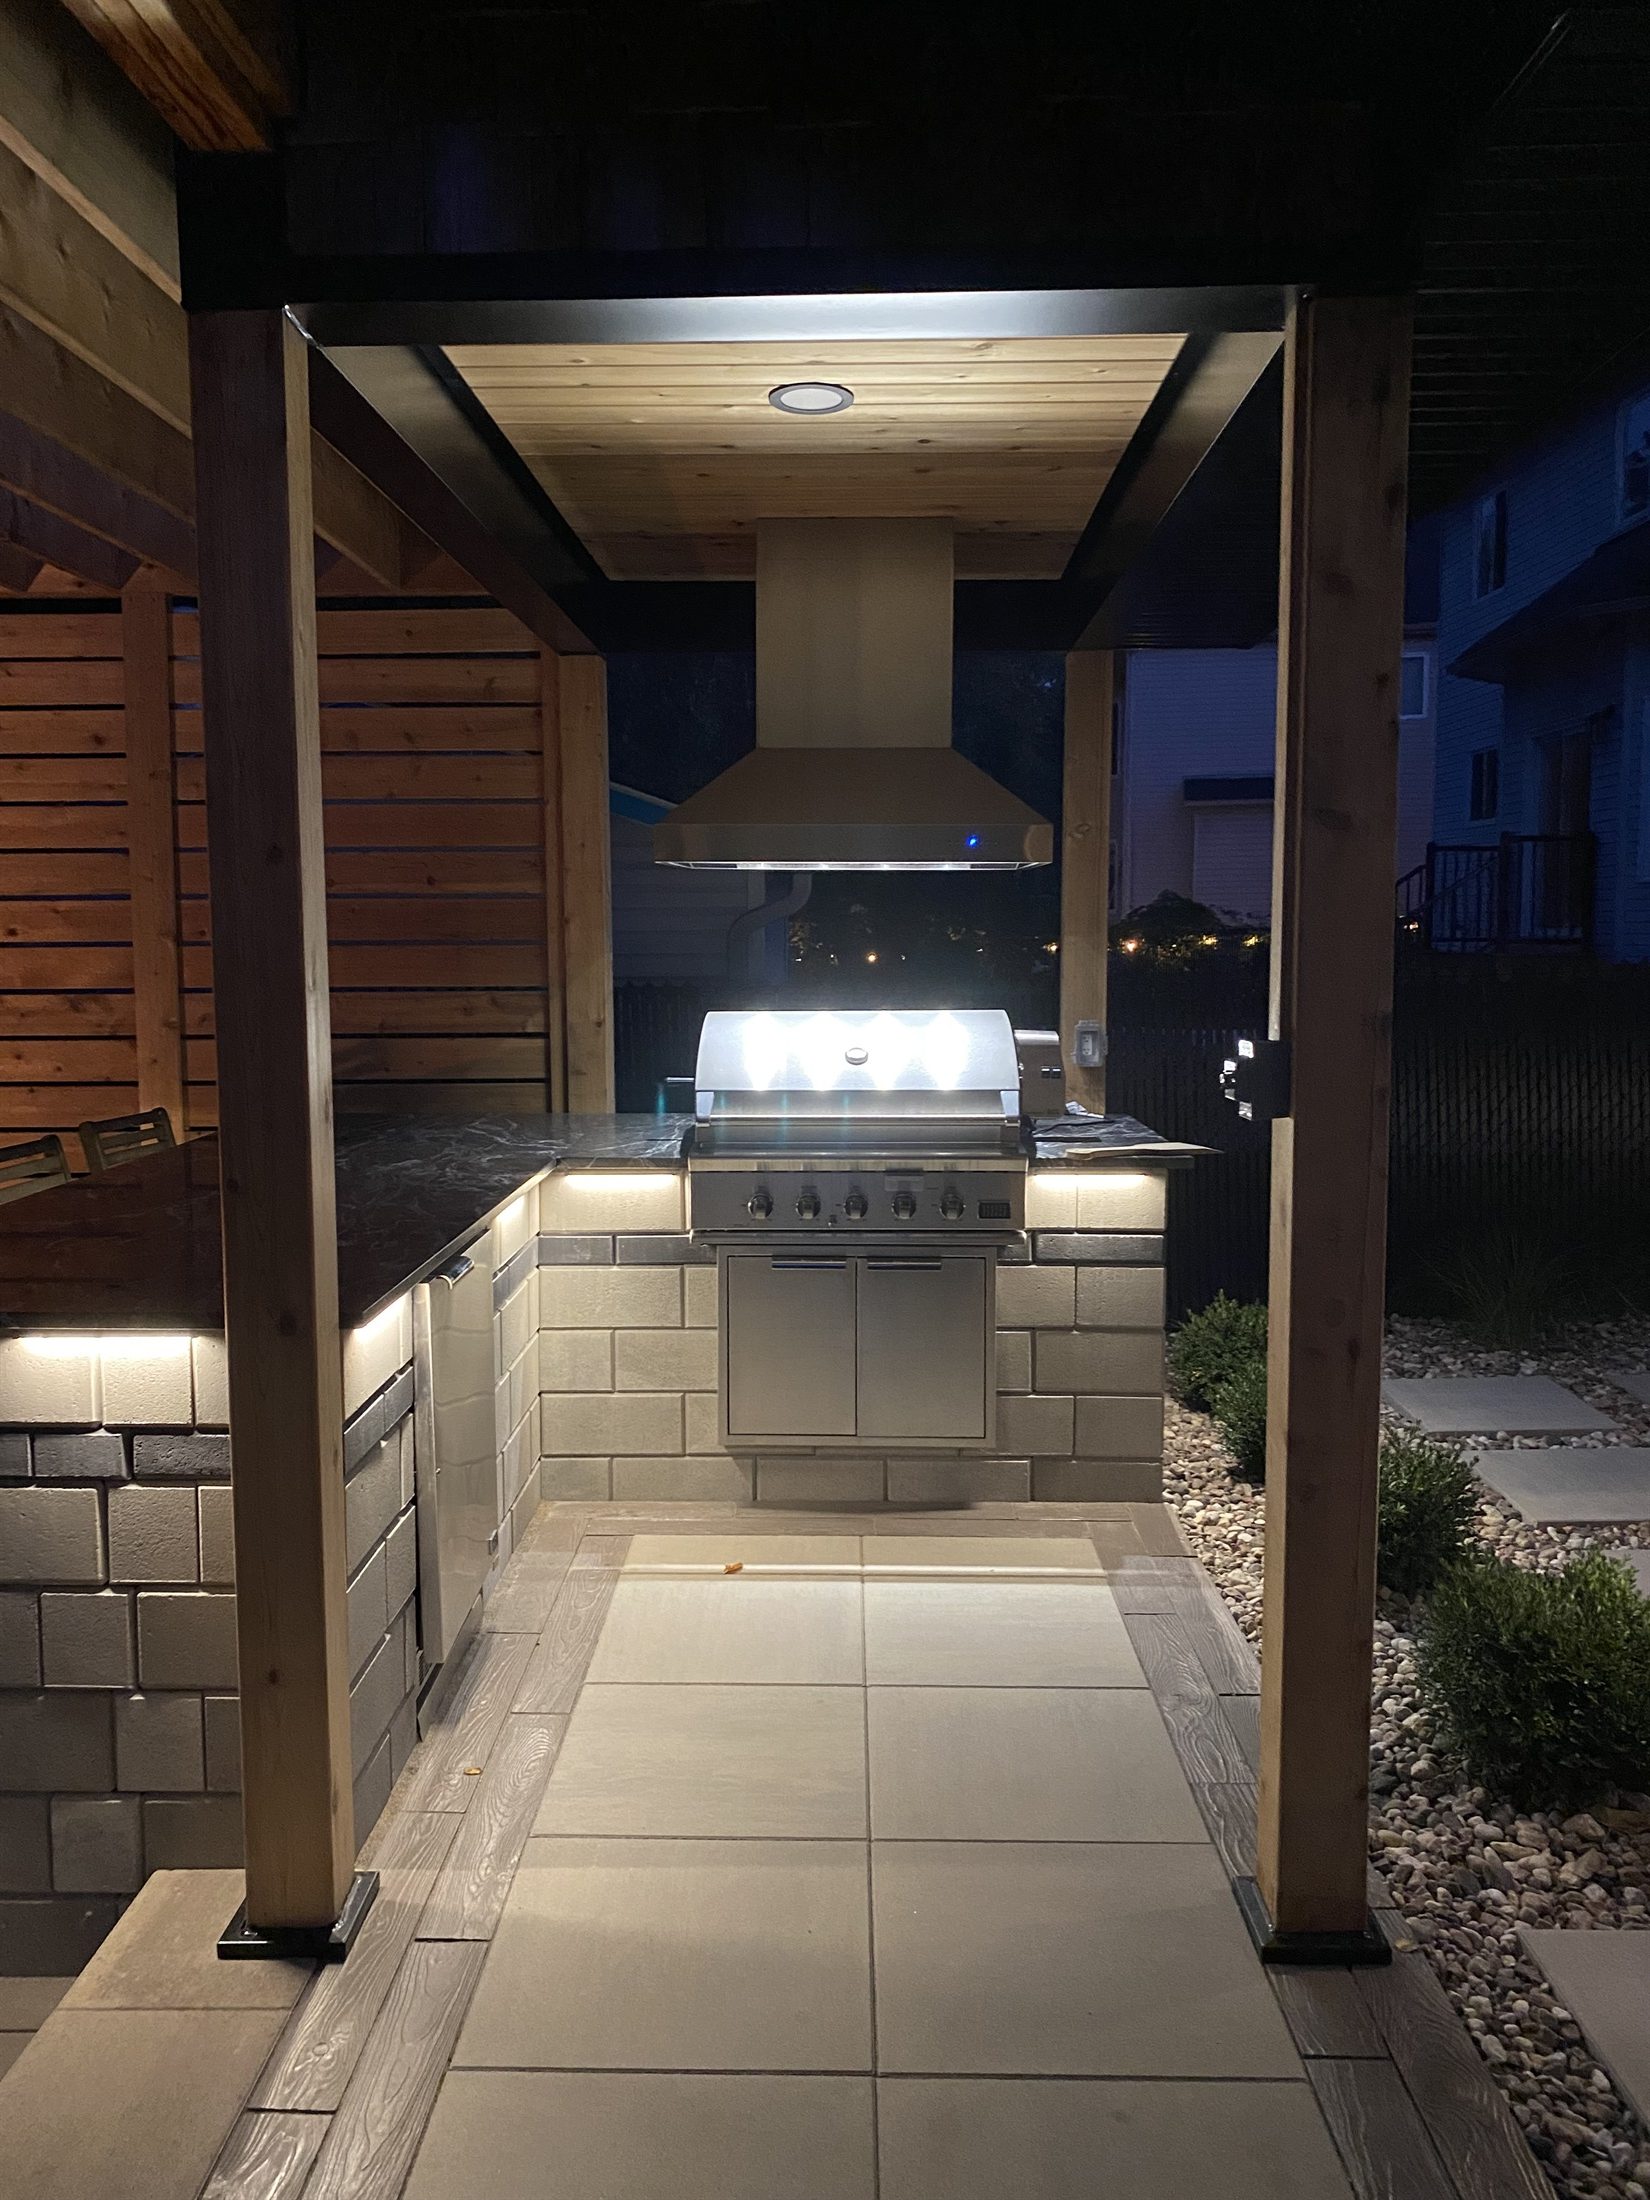 Outdoor kitchen at night with bbq, hood vent, fridge and stonework.